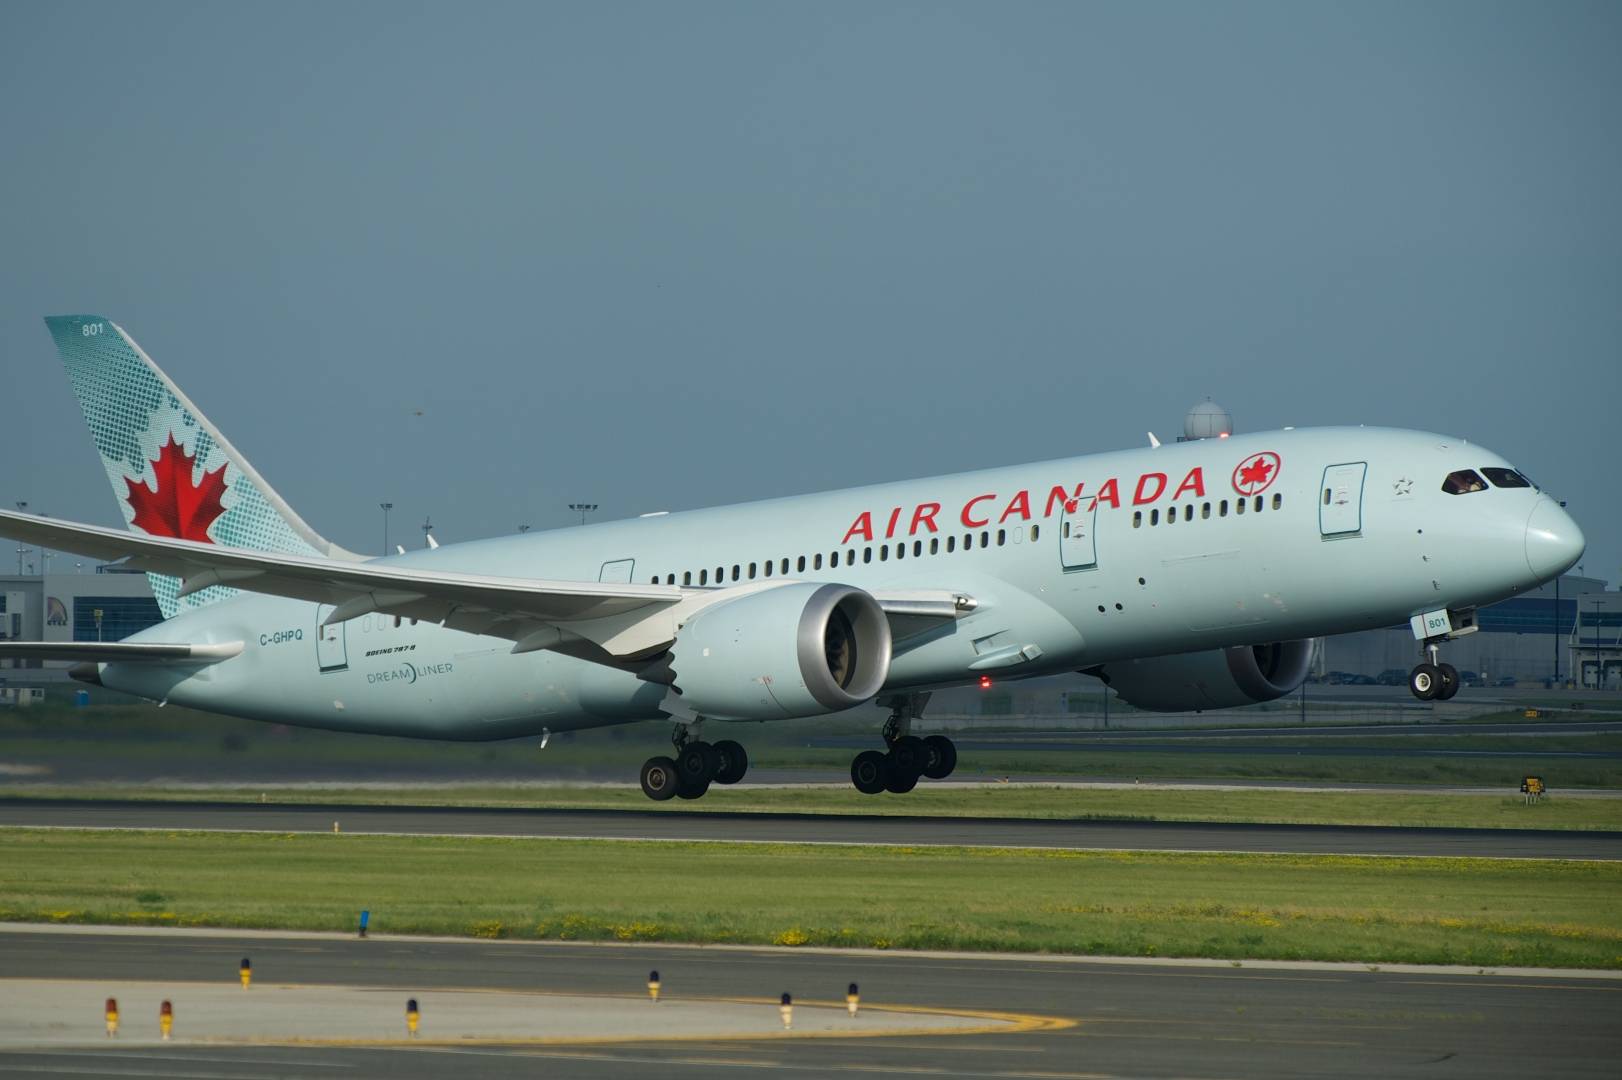 Air canada is certified as a 4-star airline | skytrax